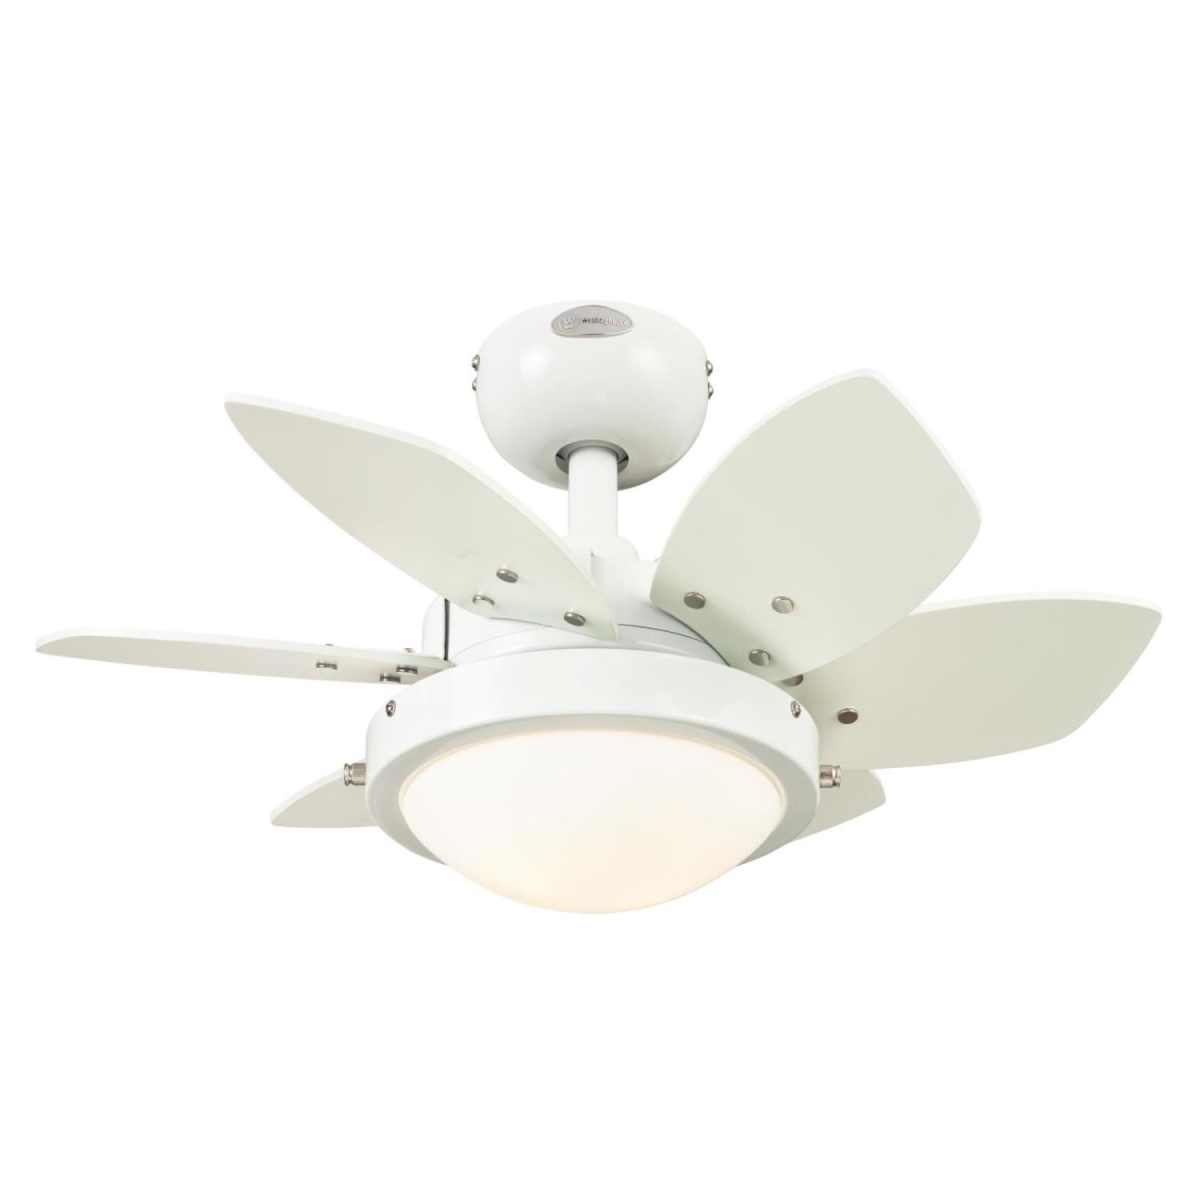 Picture of Westinghouse 7224700 24 in. Opal Frosted Glass Indoor Ceiling Fan with Reversible Blades - White & Beech